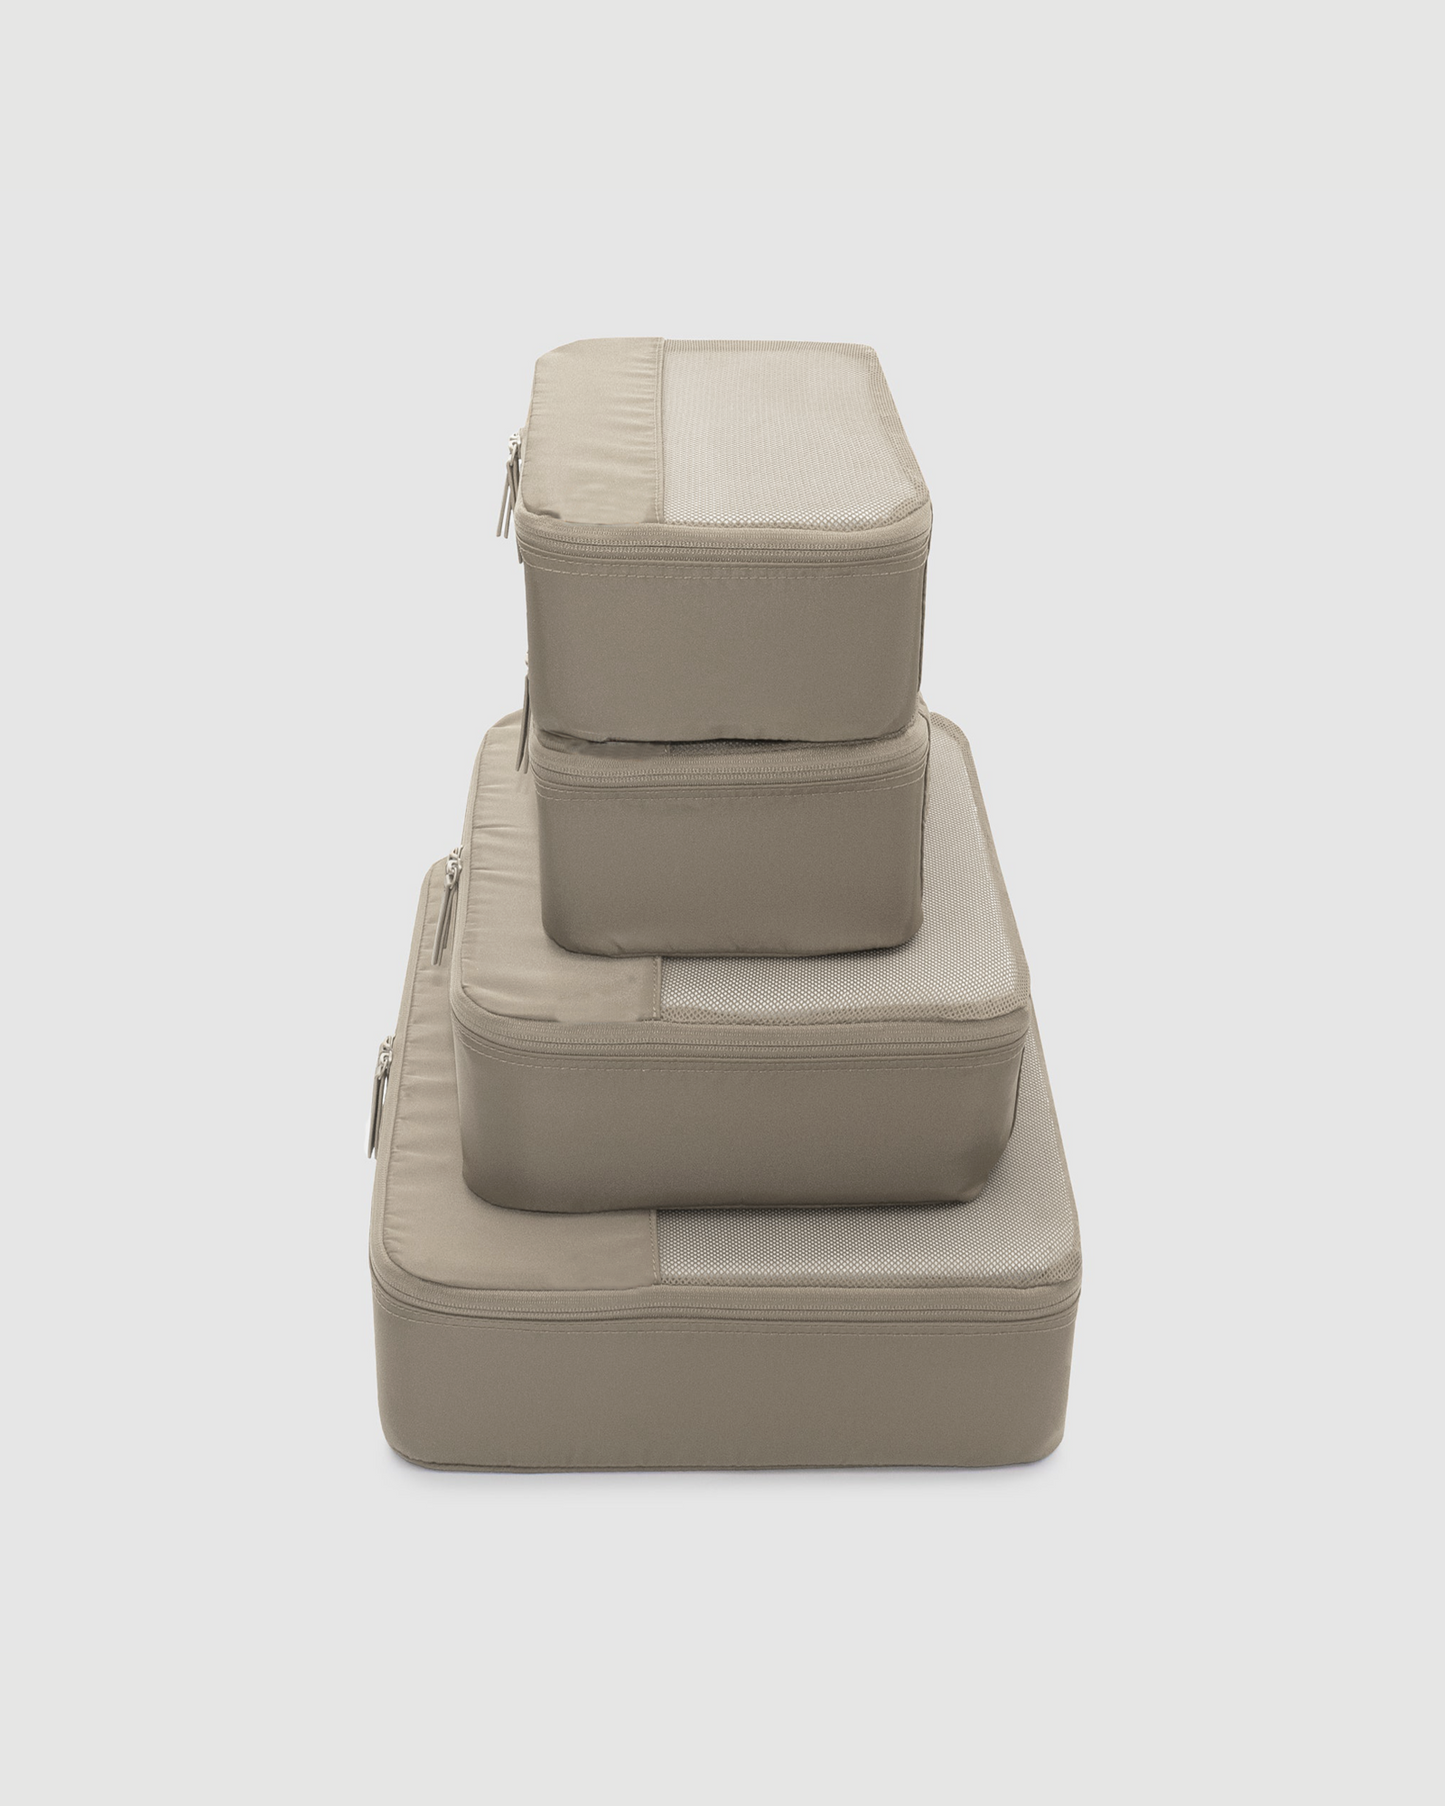 Oatmeal 4 Piece Packing Cube